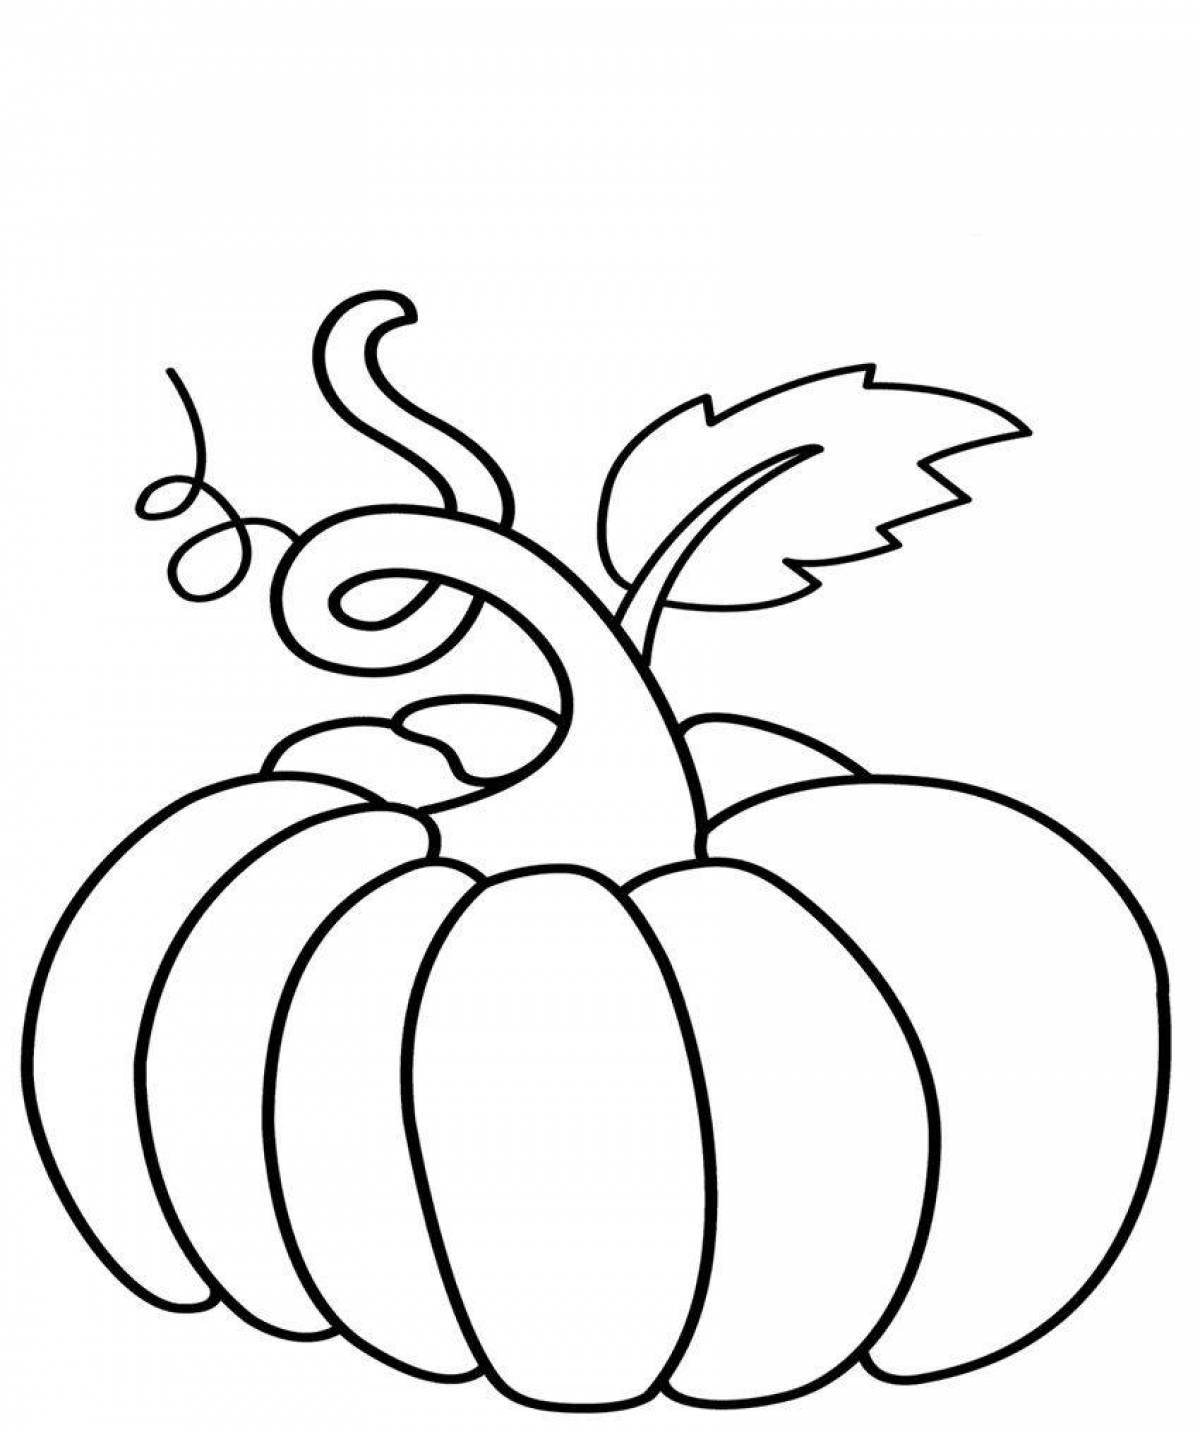 Glitter fruit coloring pages for kids